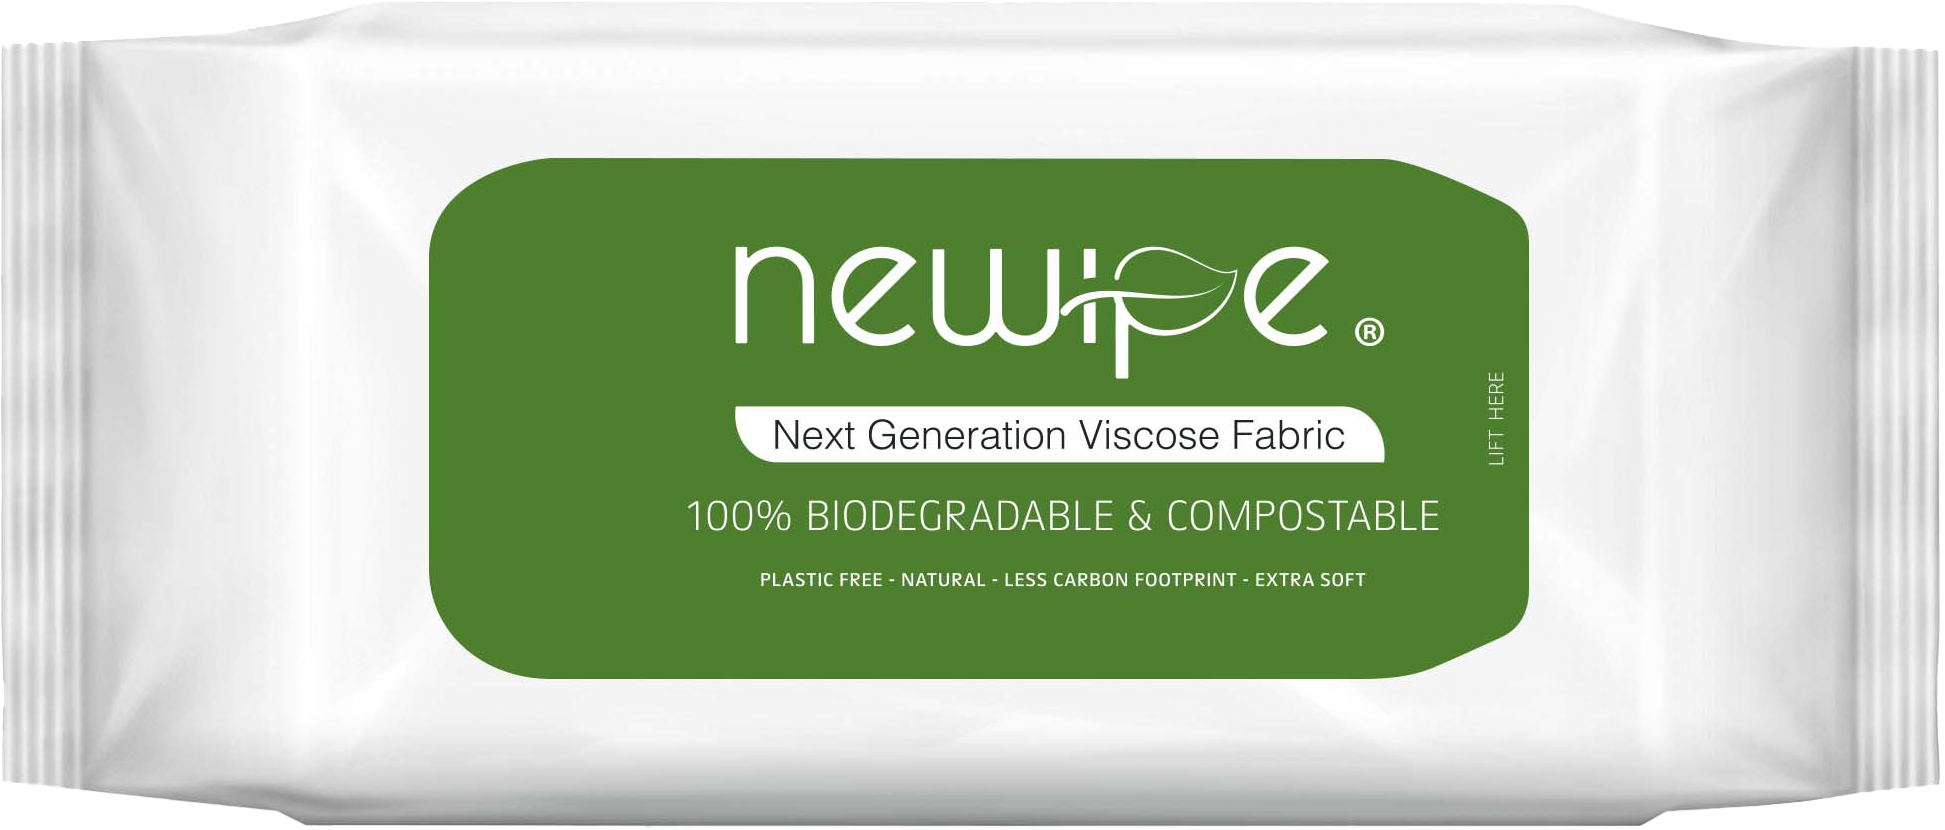 Newipe products are produced with a lower carbon footprint than competing products. © Andritz